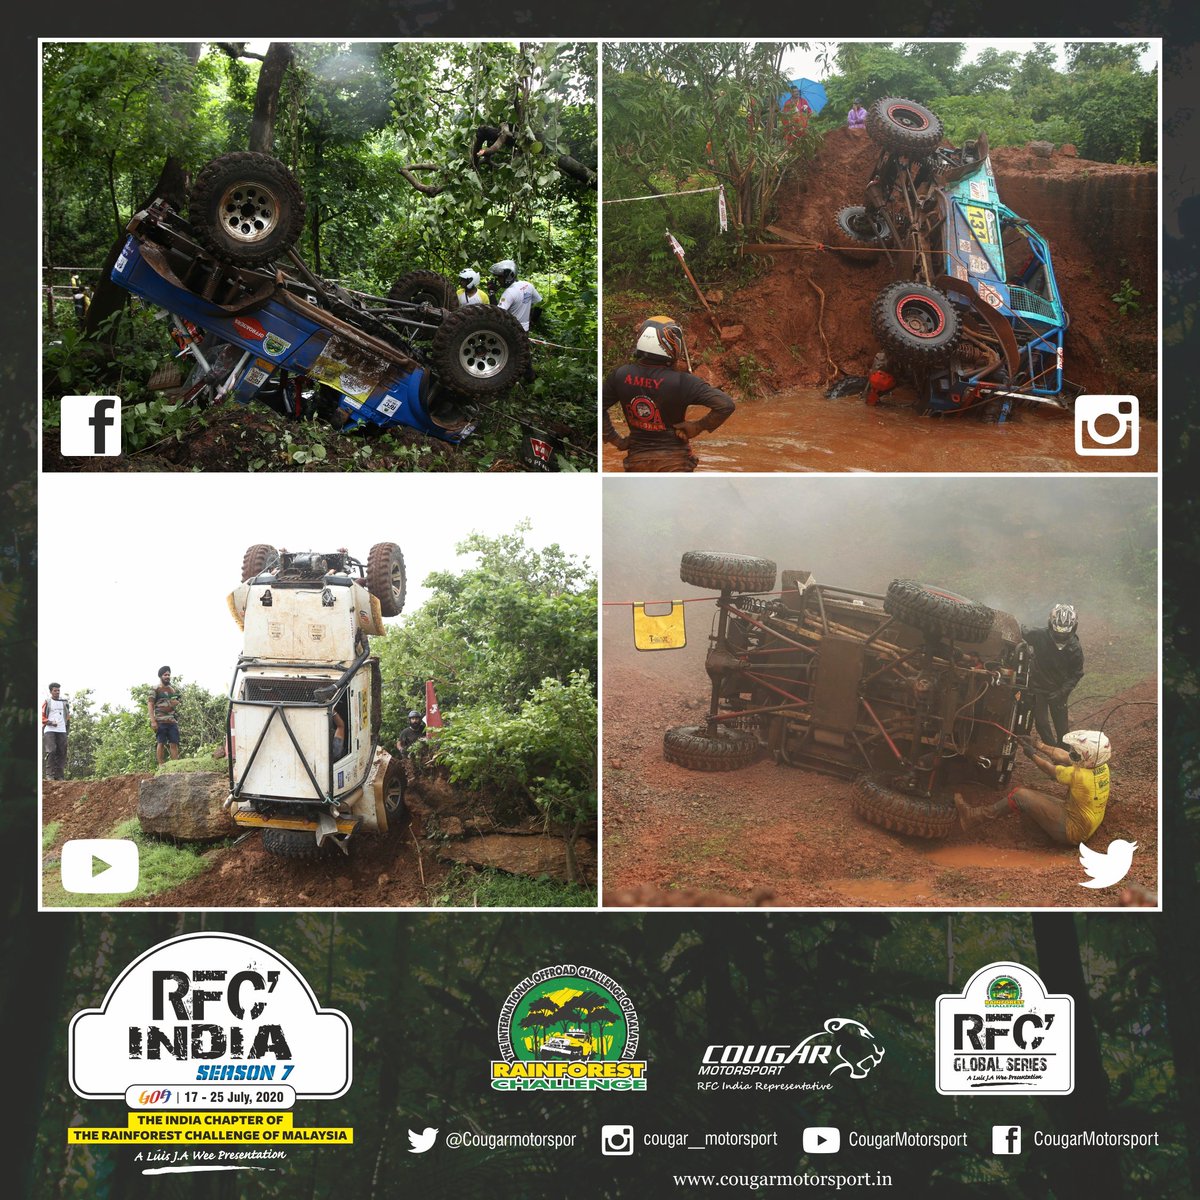 Challenge Accepted!
Never a Dull Moment | RFC India
#CougarMotorsport #rfcindia #RainforestChallengeIndia #4x4 #extremesport